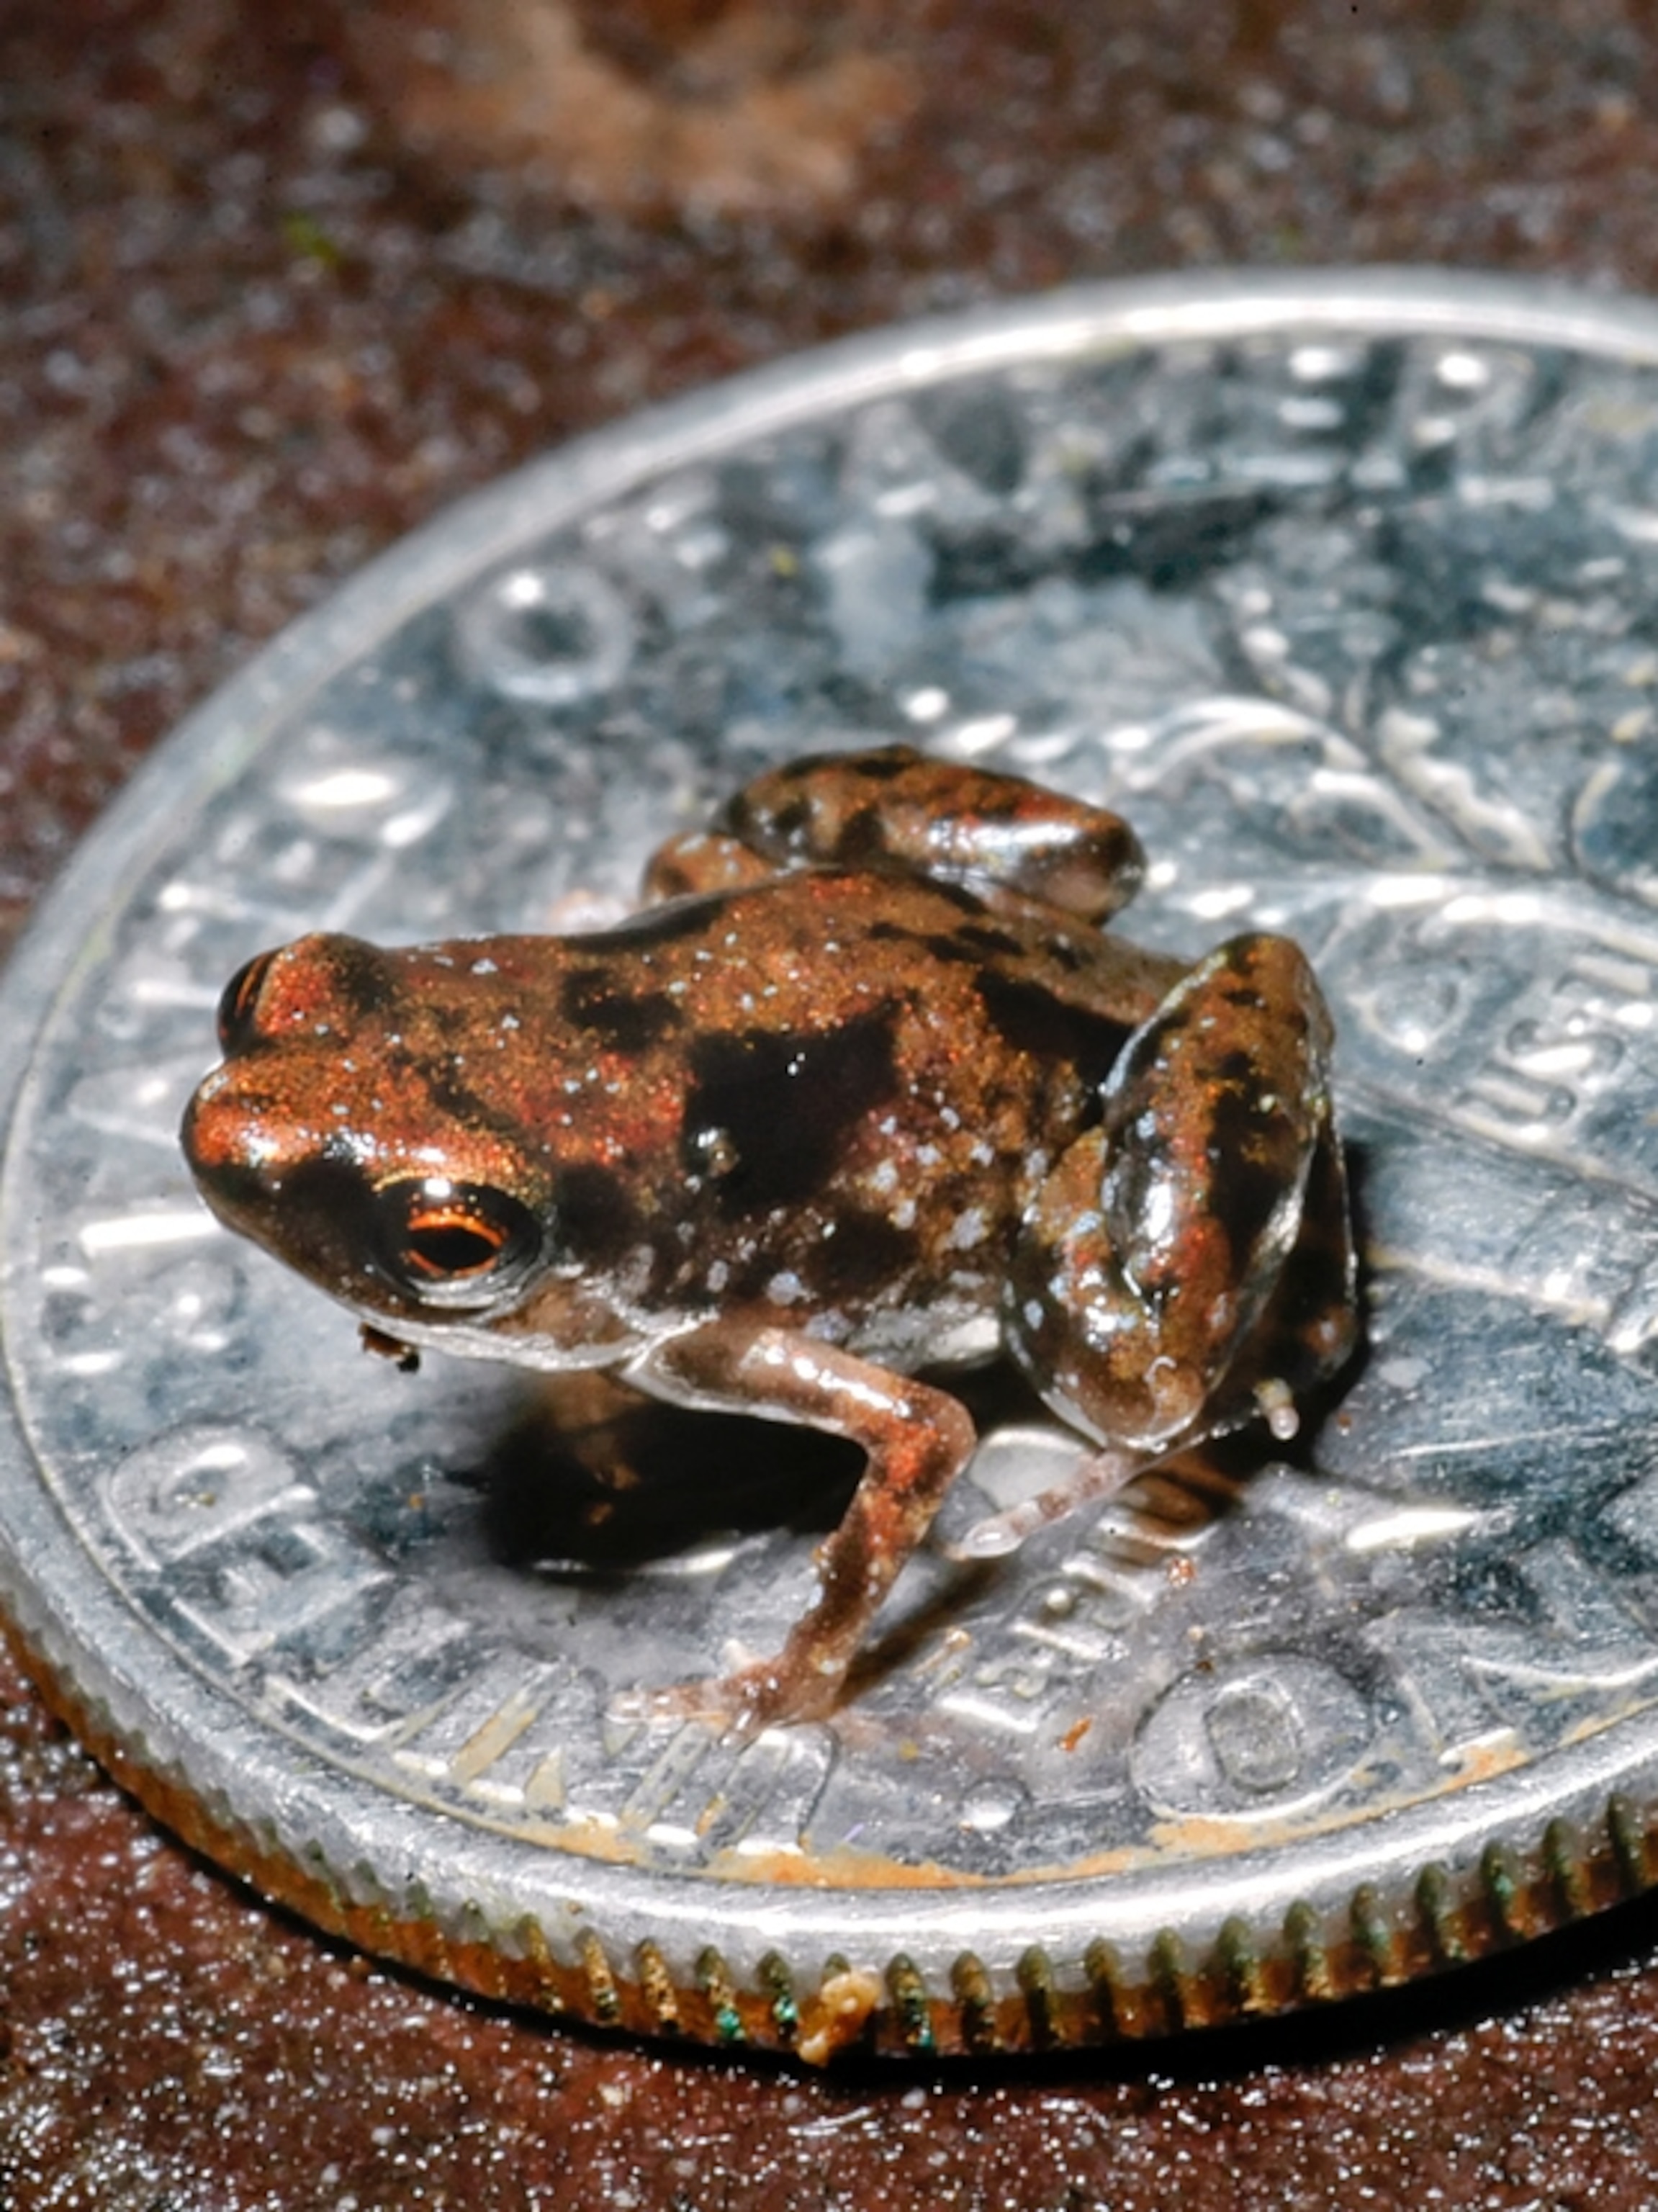 What is the smallest amphibian in the world?